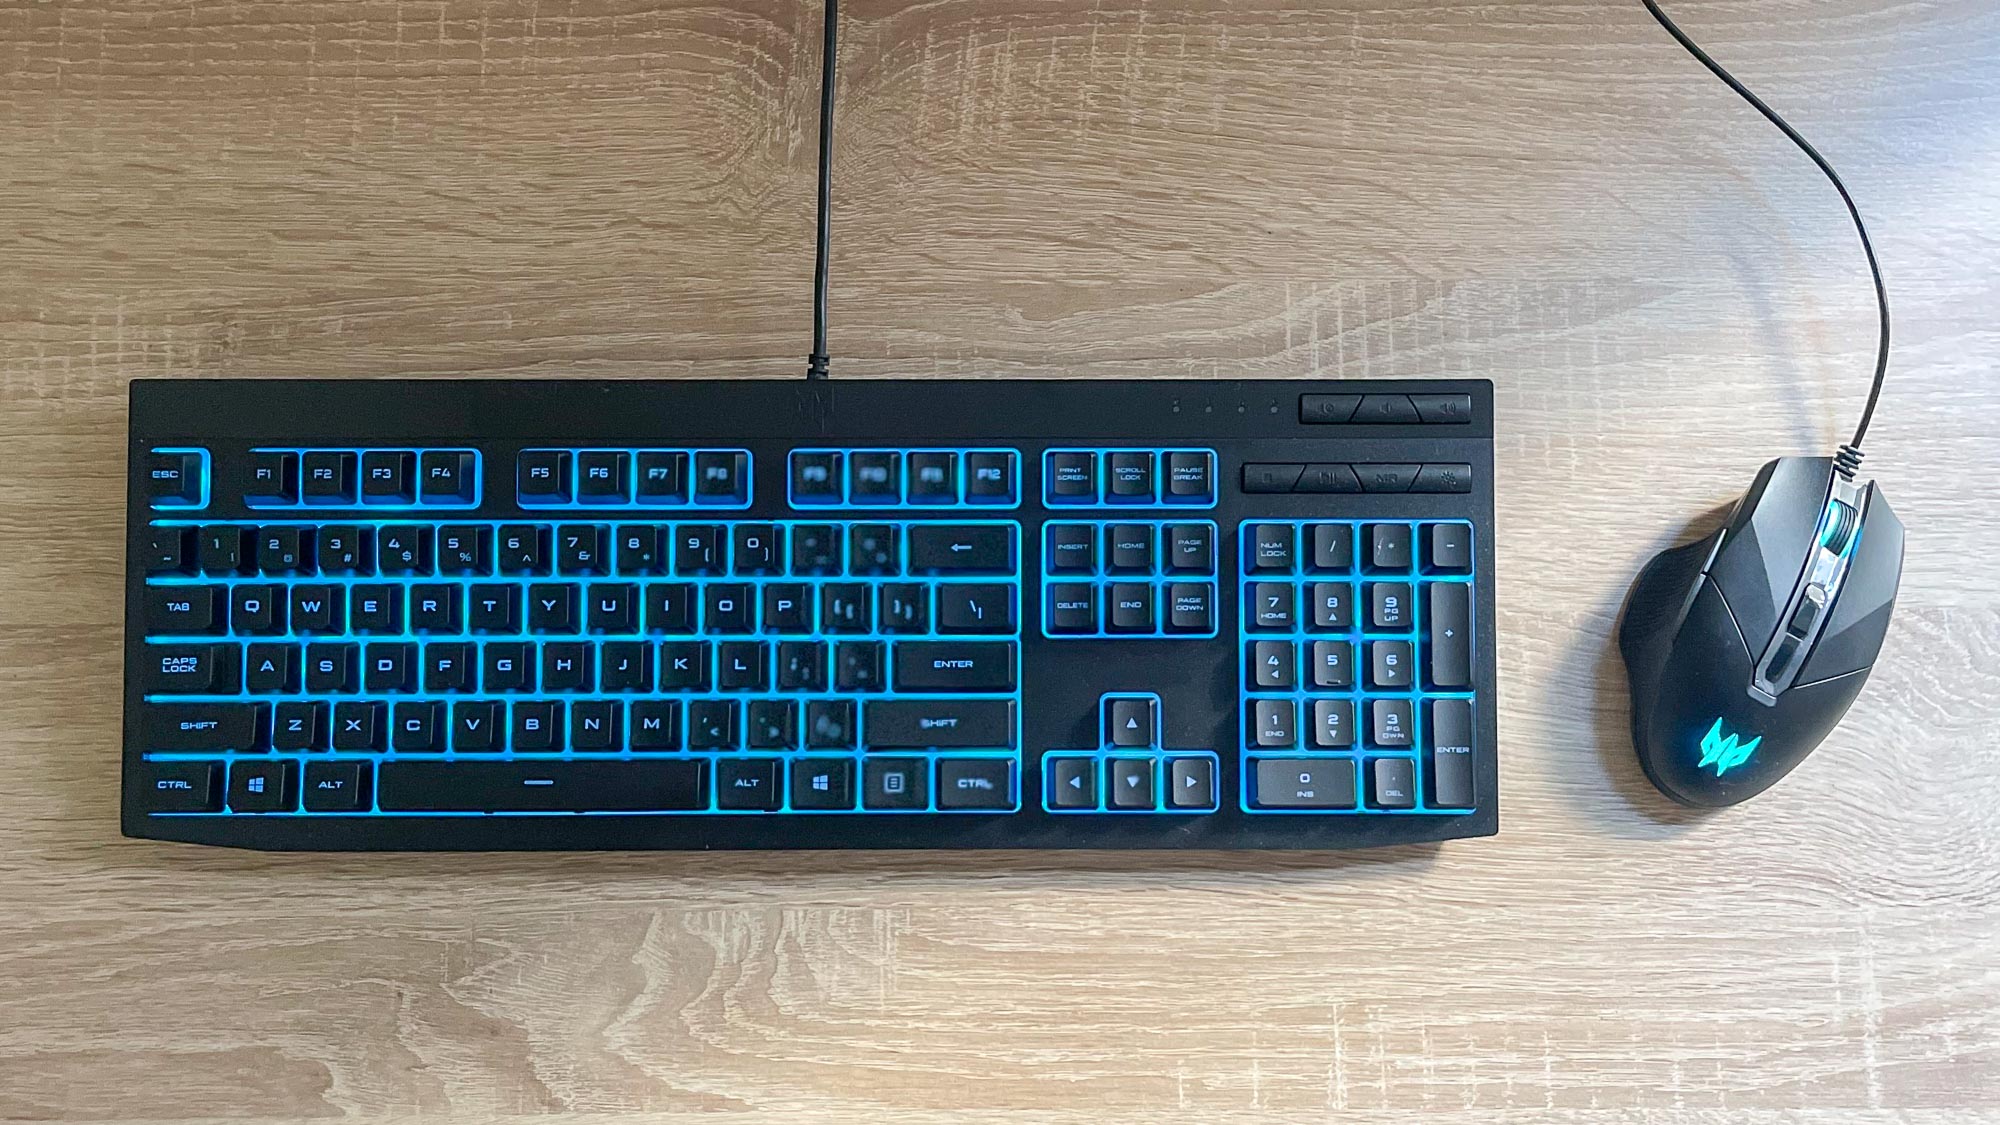 Acer Predator Orion 3000 keyboard and mouse on a desk